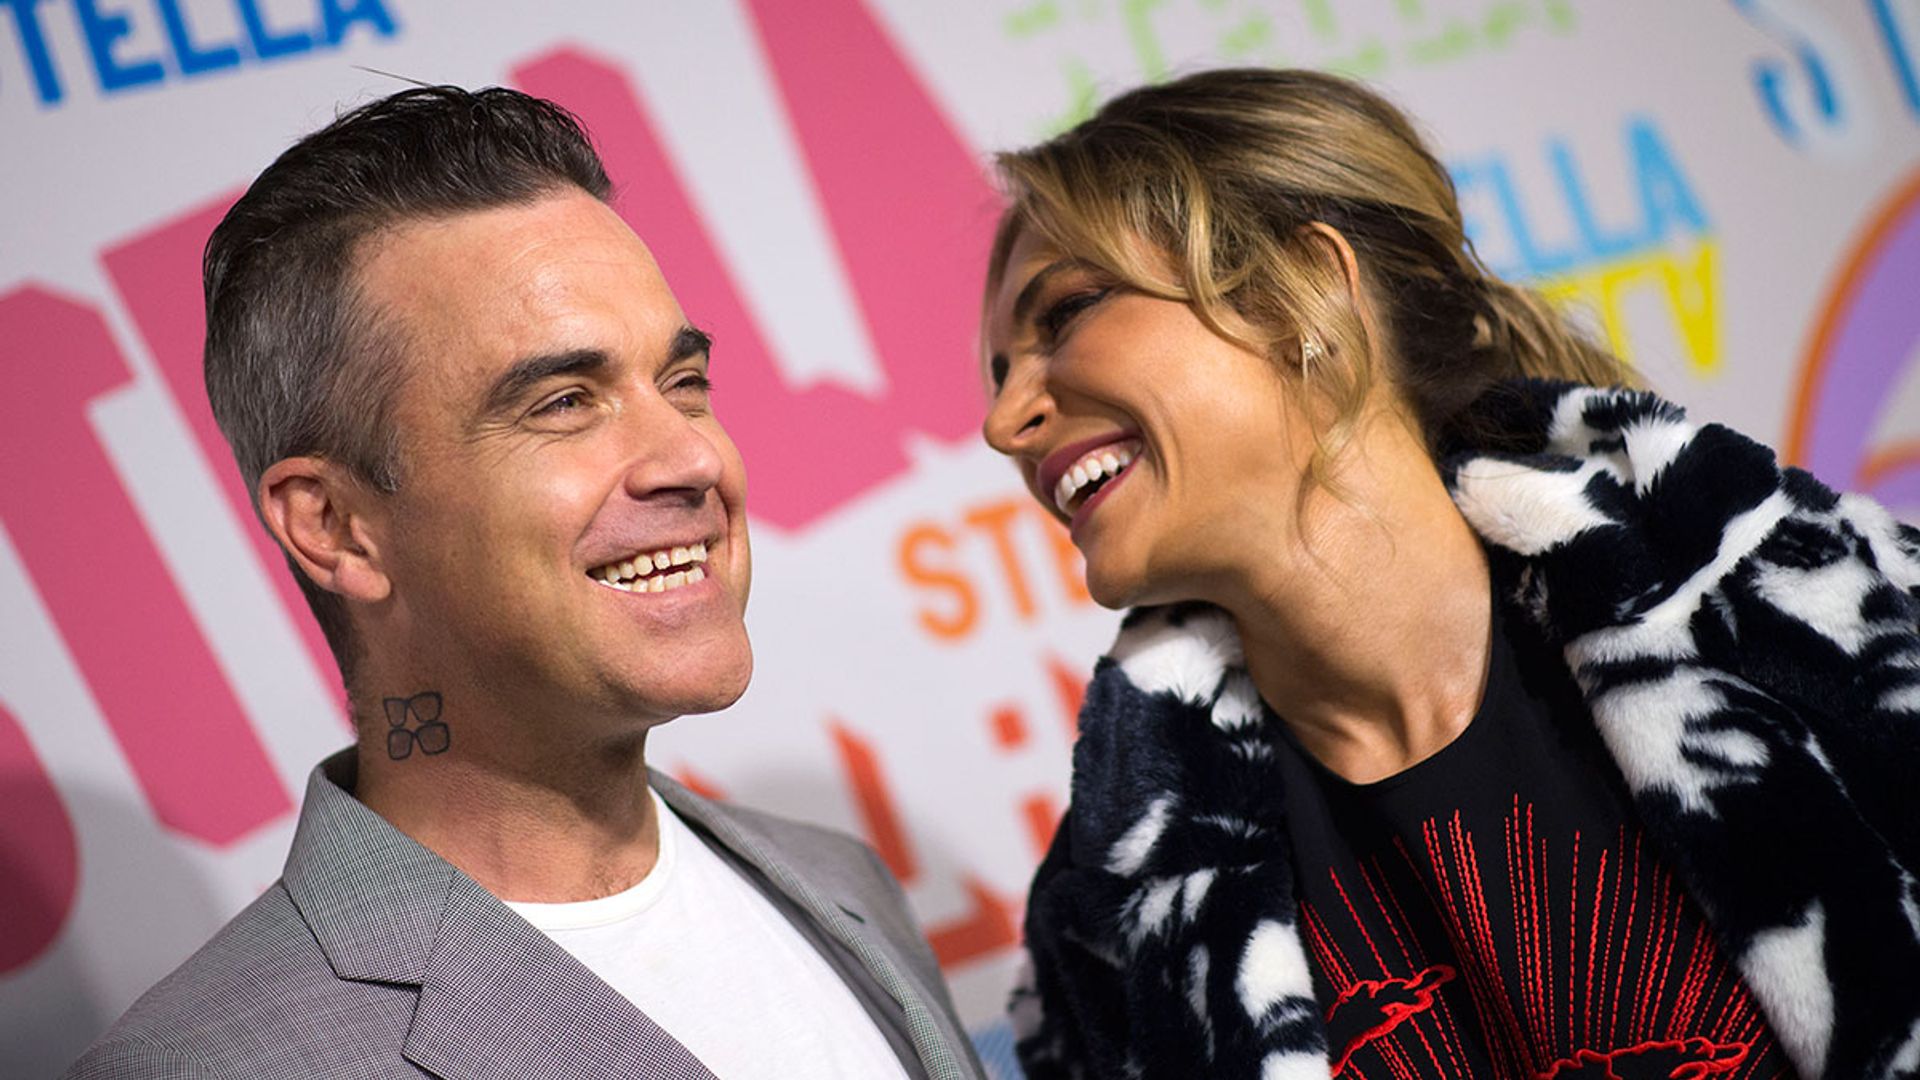 Robbie Williams and Ayda Fields son Beau takes first steps in adorable new video pic